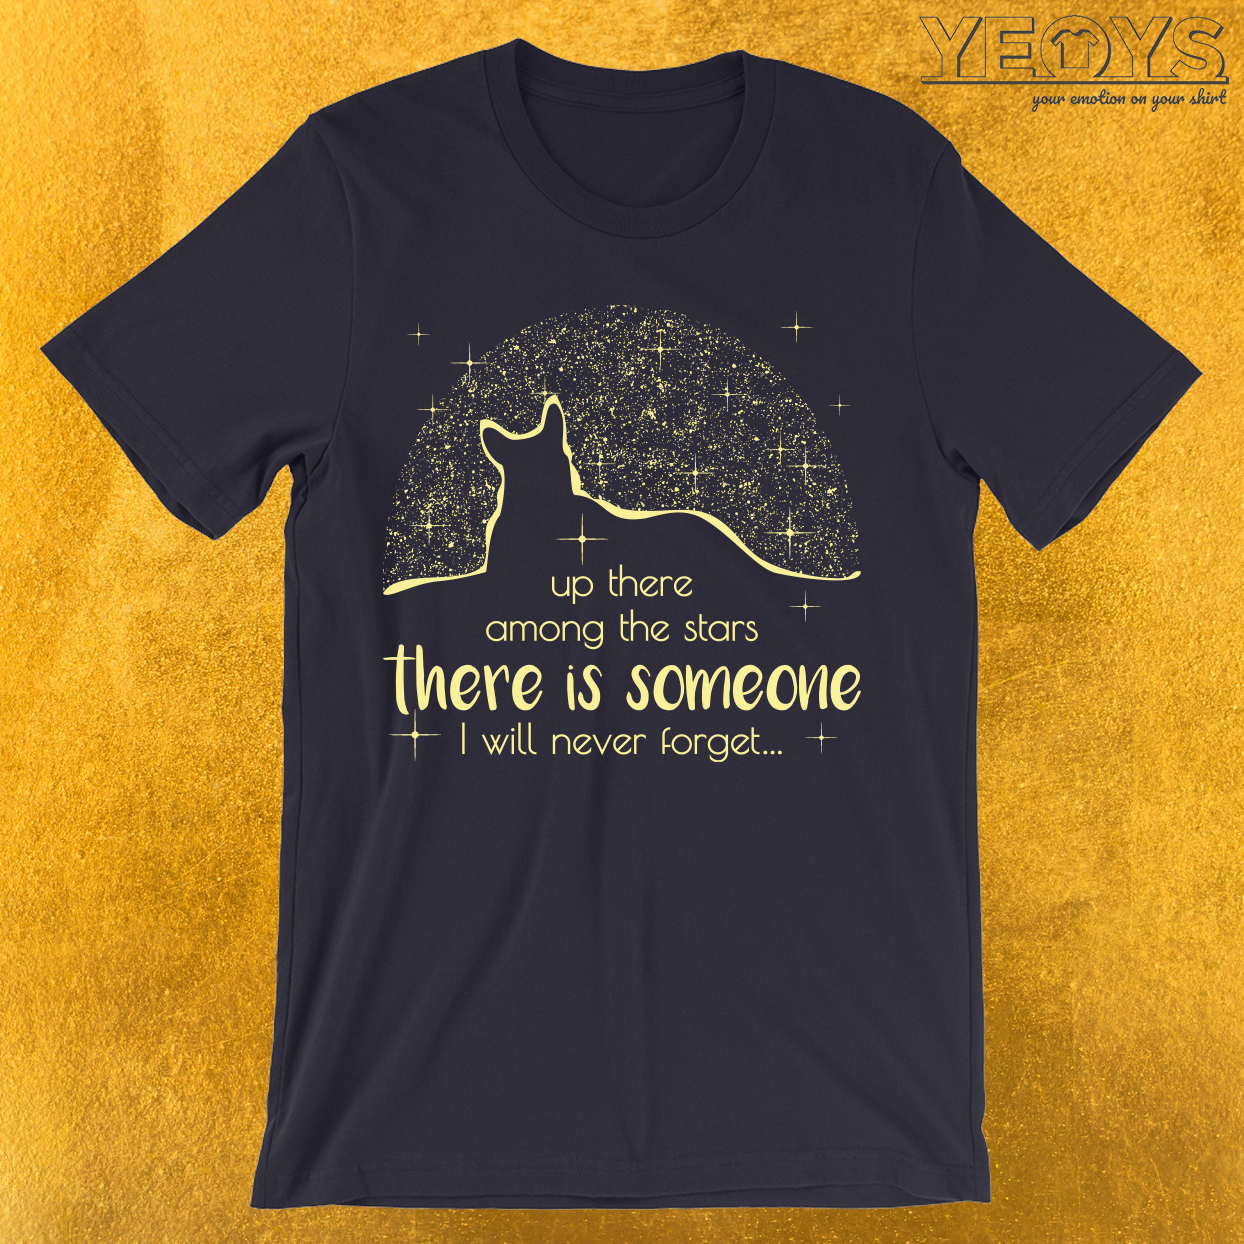 My Dog Up There Among The Stars T-Shirt